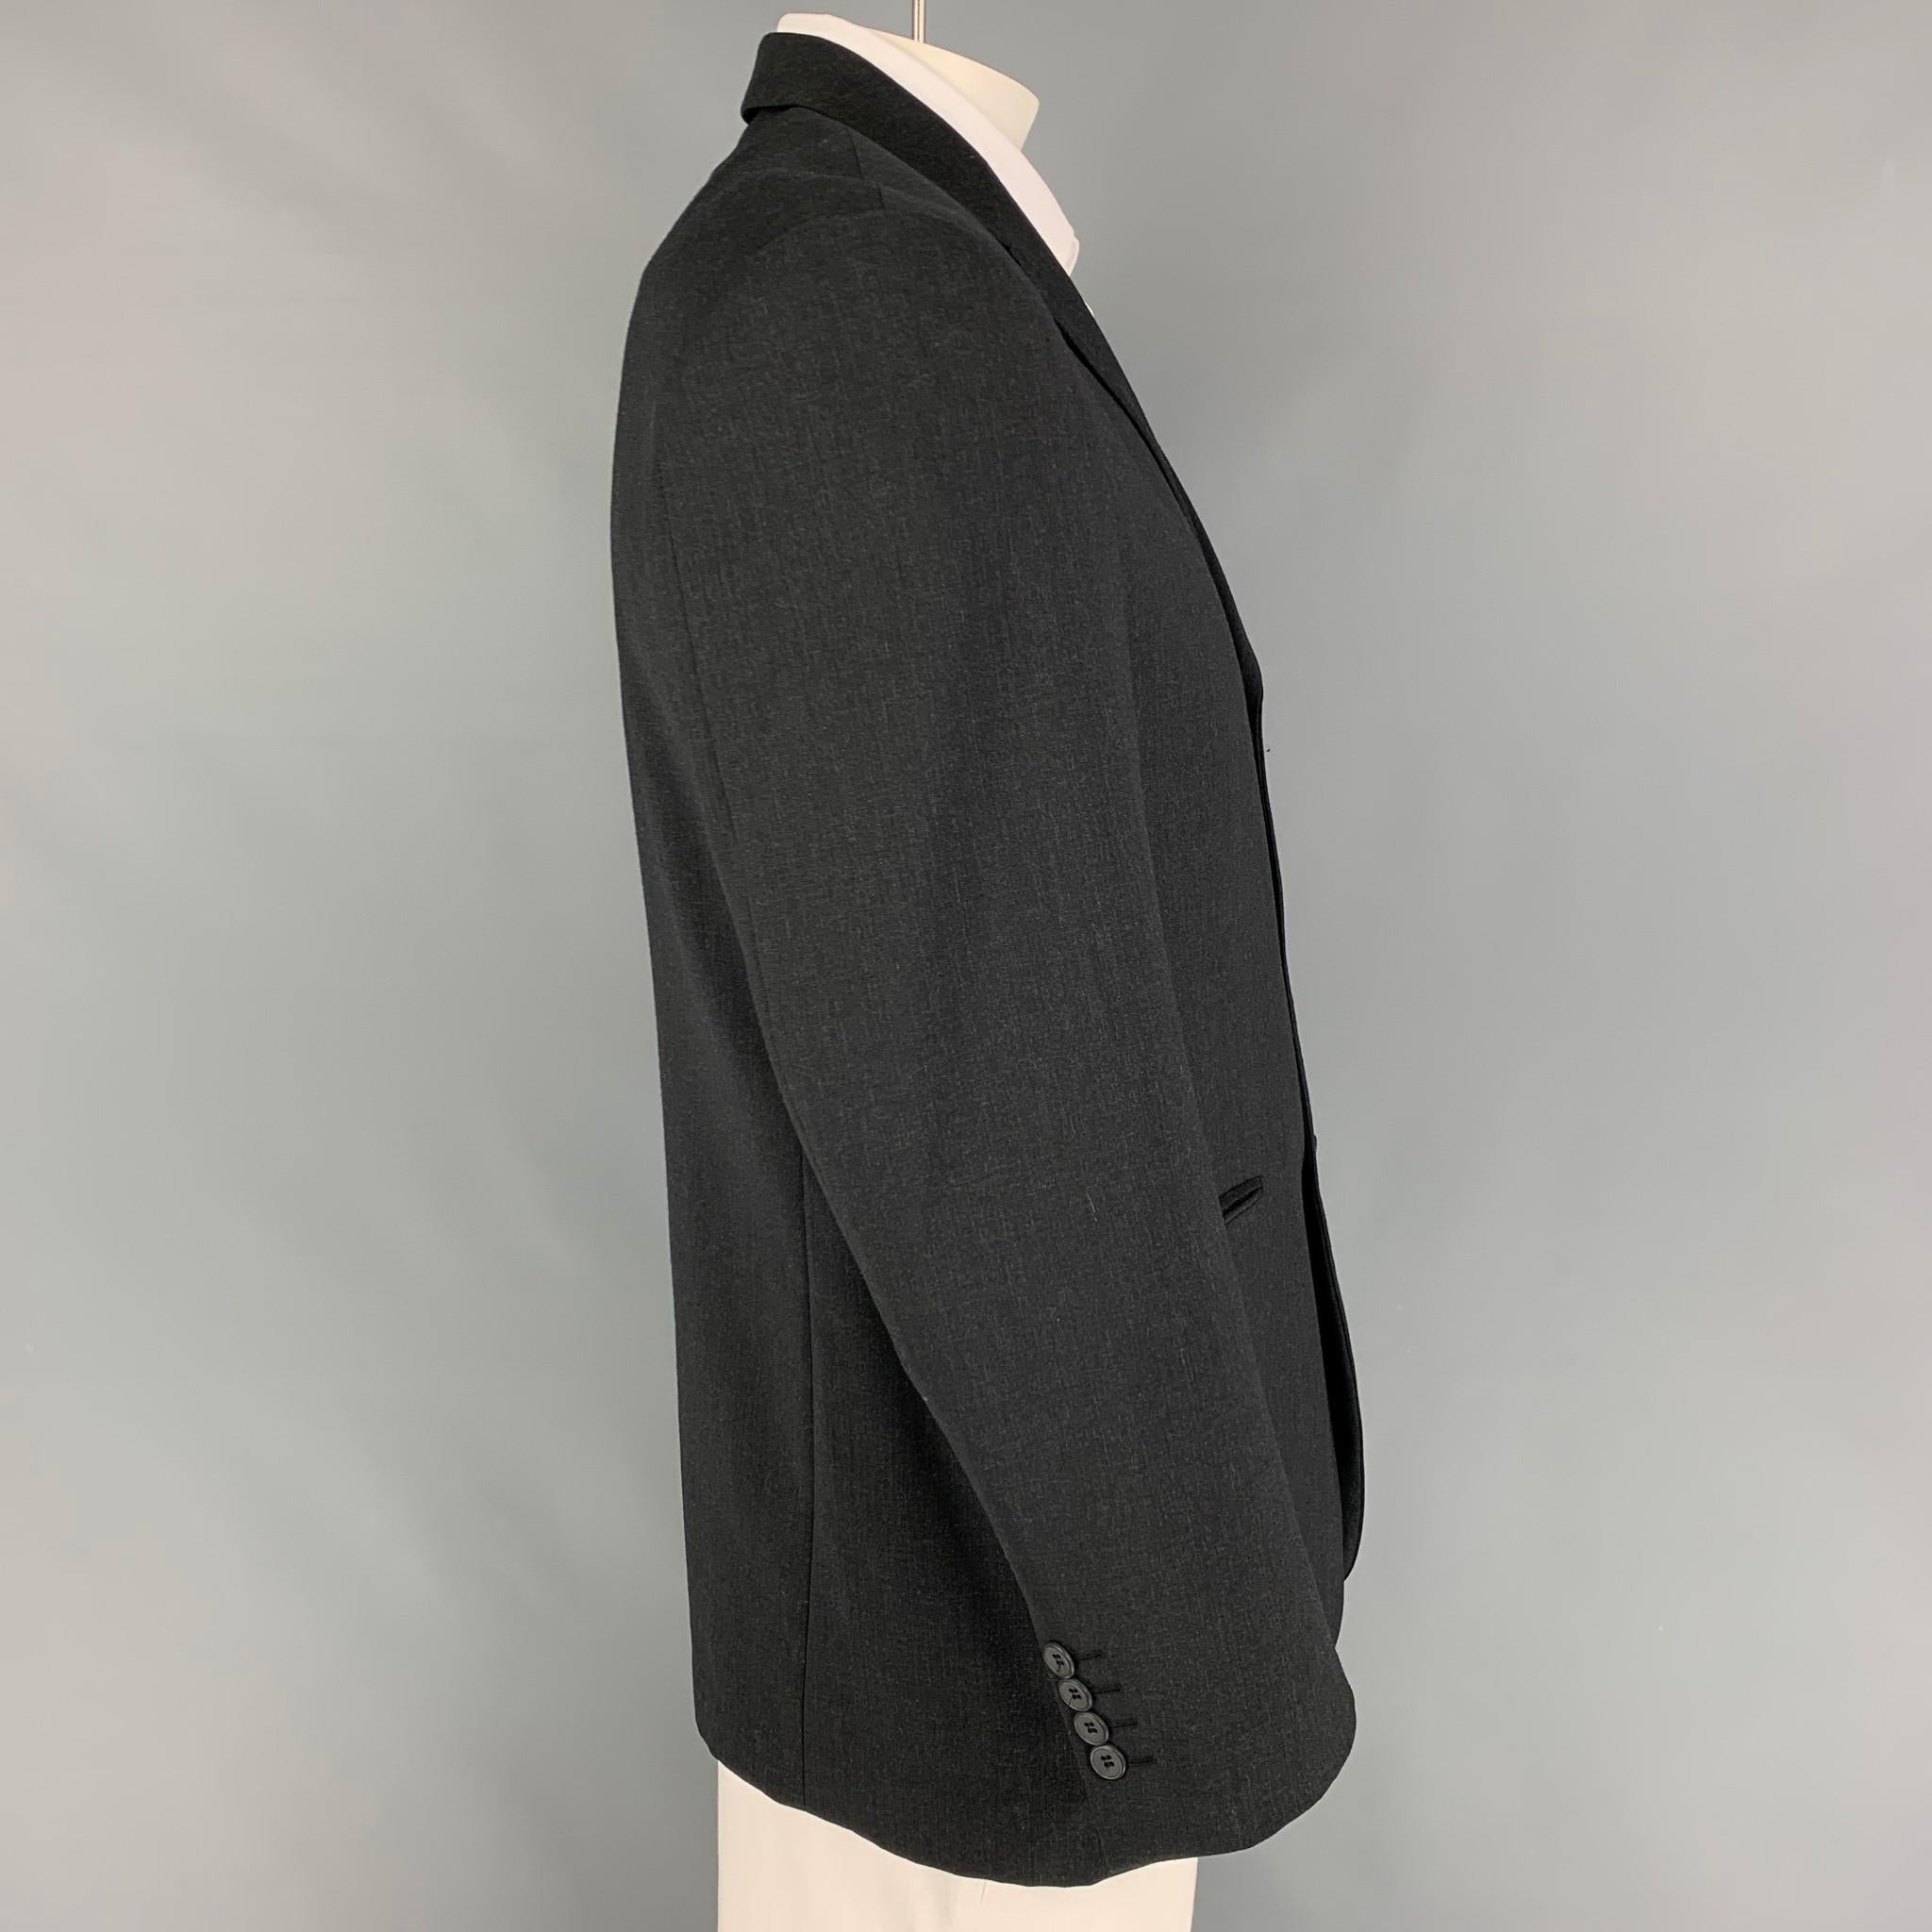 BALENCIAGA sport coat comes in a charcoal wool with a full liner featuring a notch lapel, slit pockets, and a three button closure. 

Very Good Pre-Owned Condition.

Measurements:

Shoulder: 19 in.
Chest: 42 in.
Sleeve: 25 in.
Length: 30.5 in. 